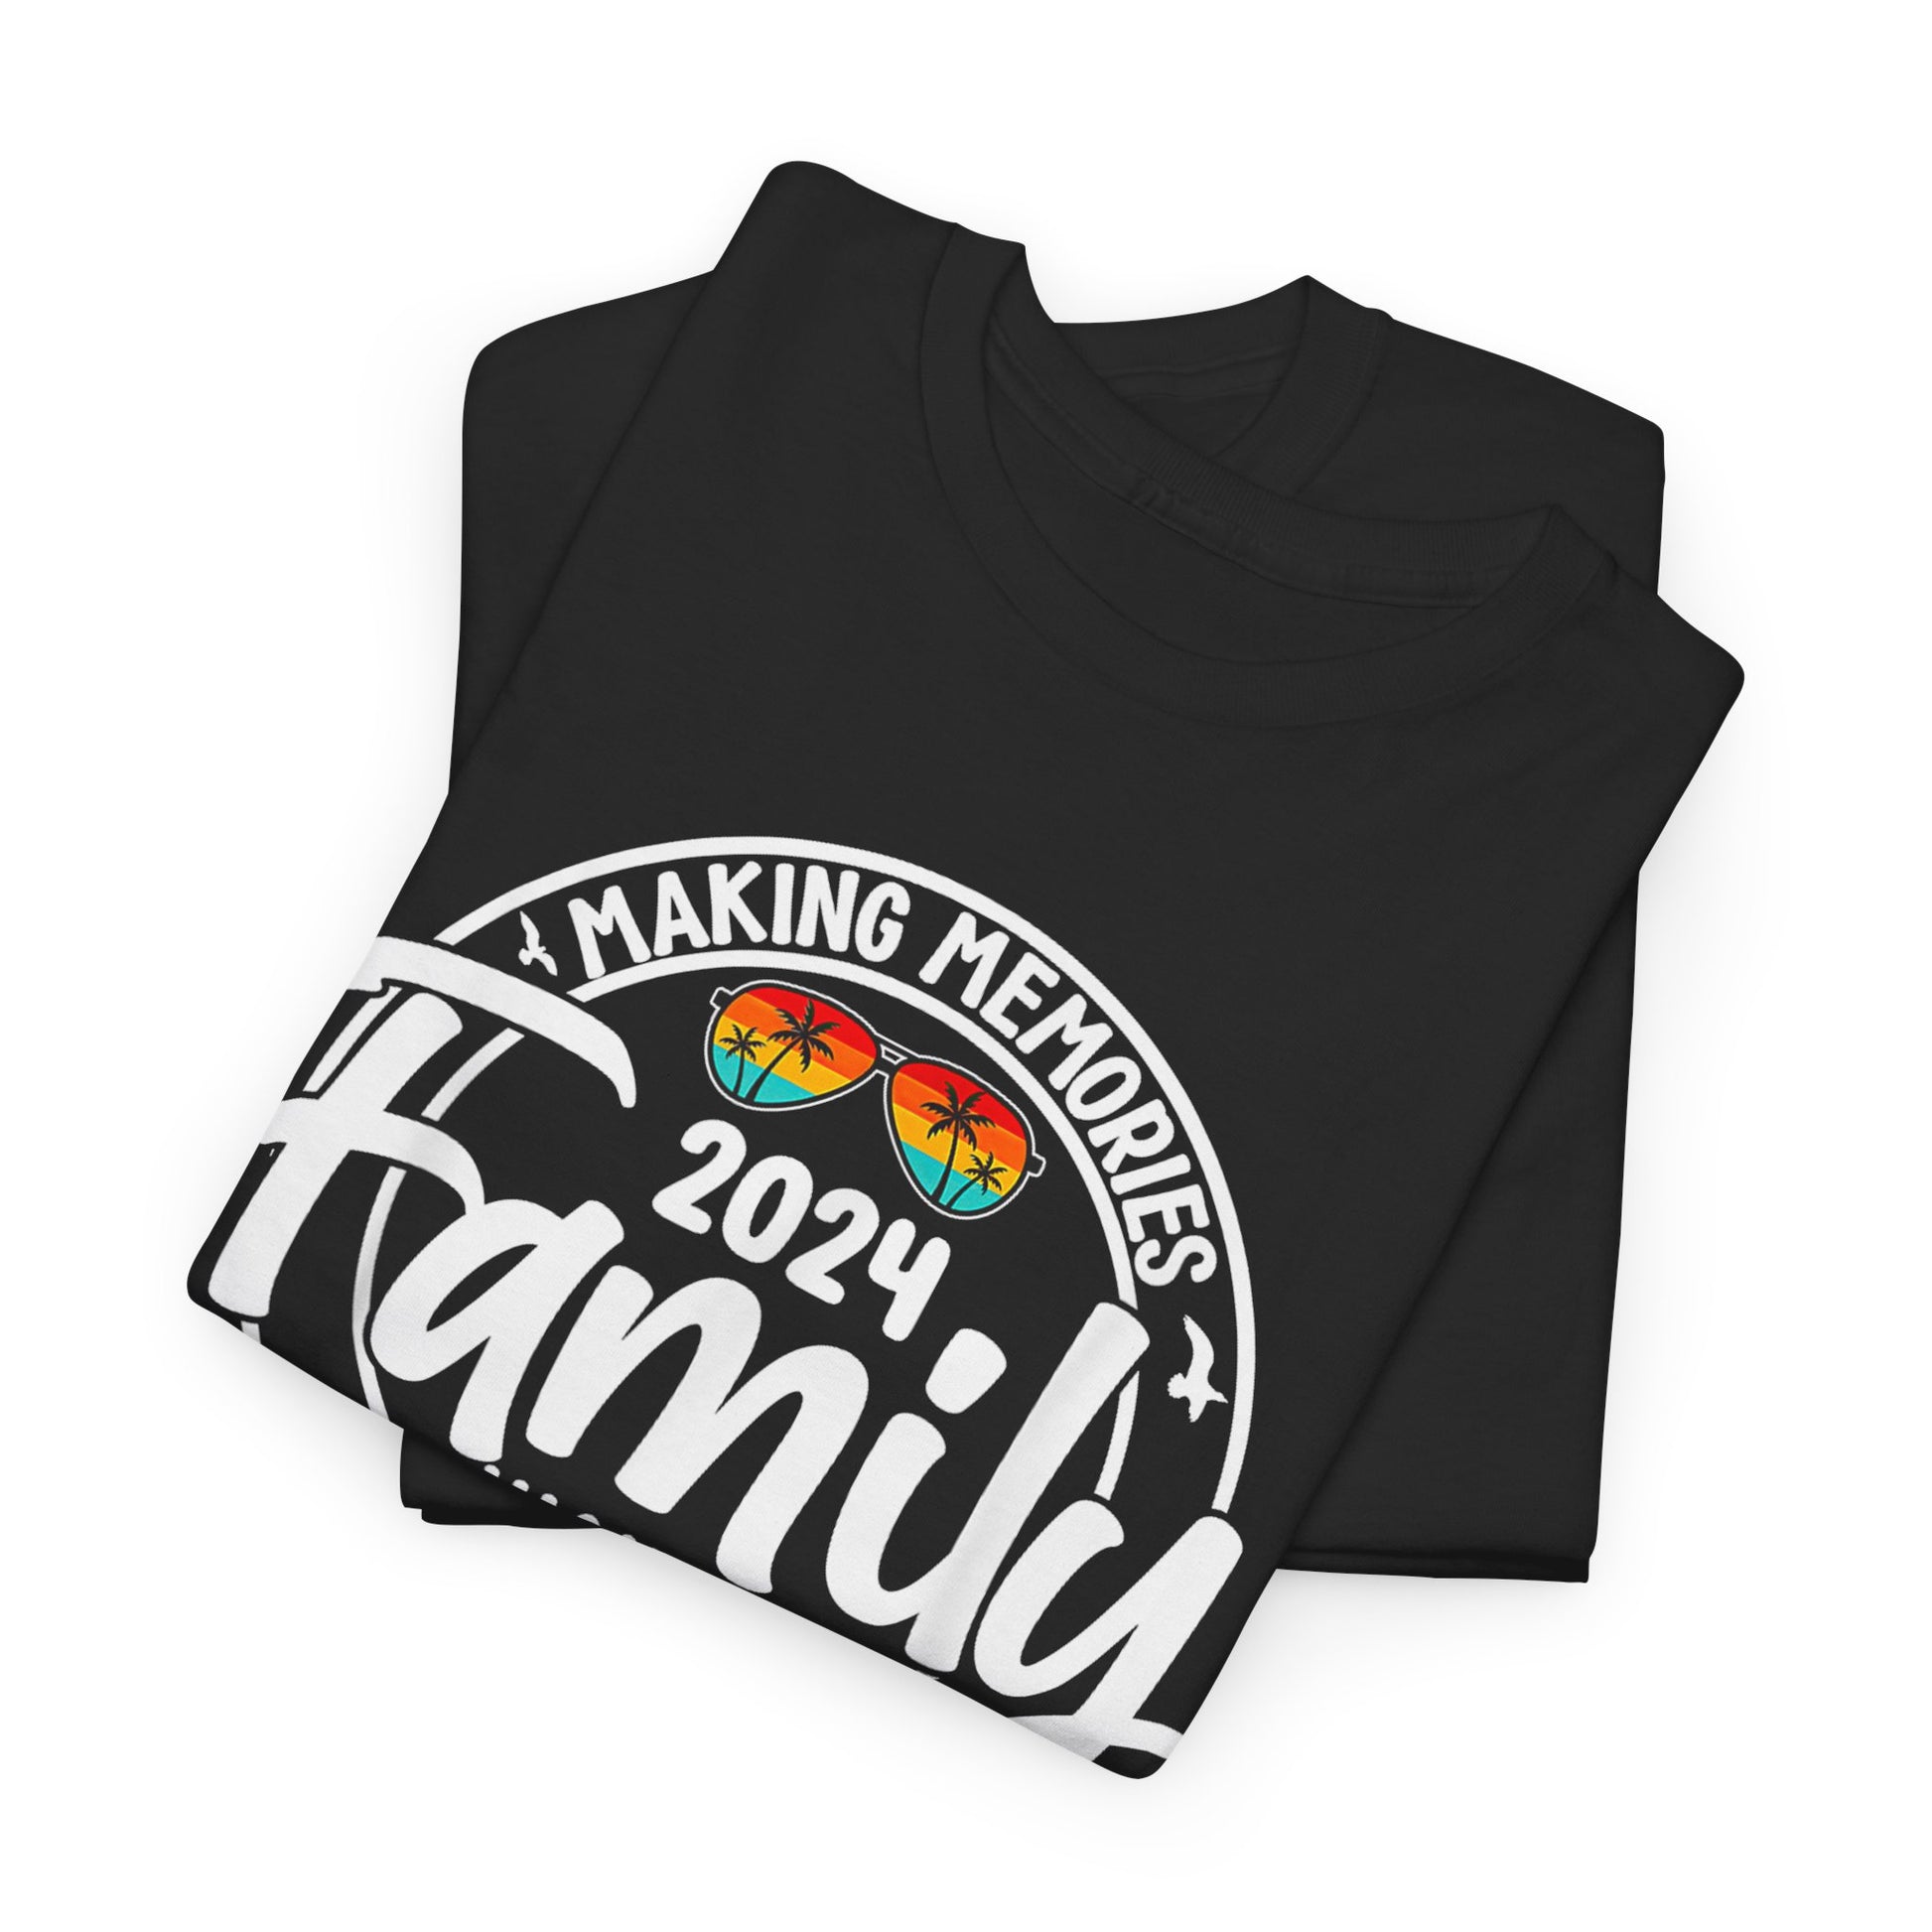 Making Memories Family Vacay - Craftee Designs & Prints 